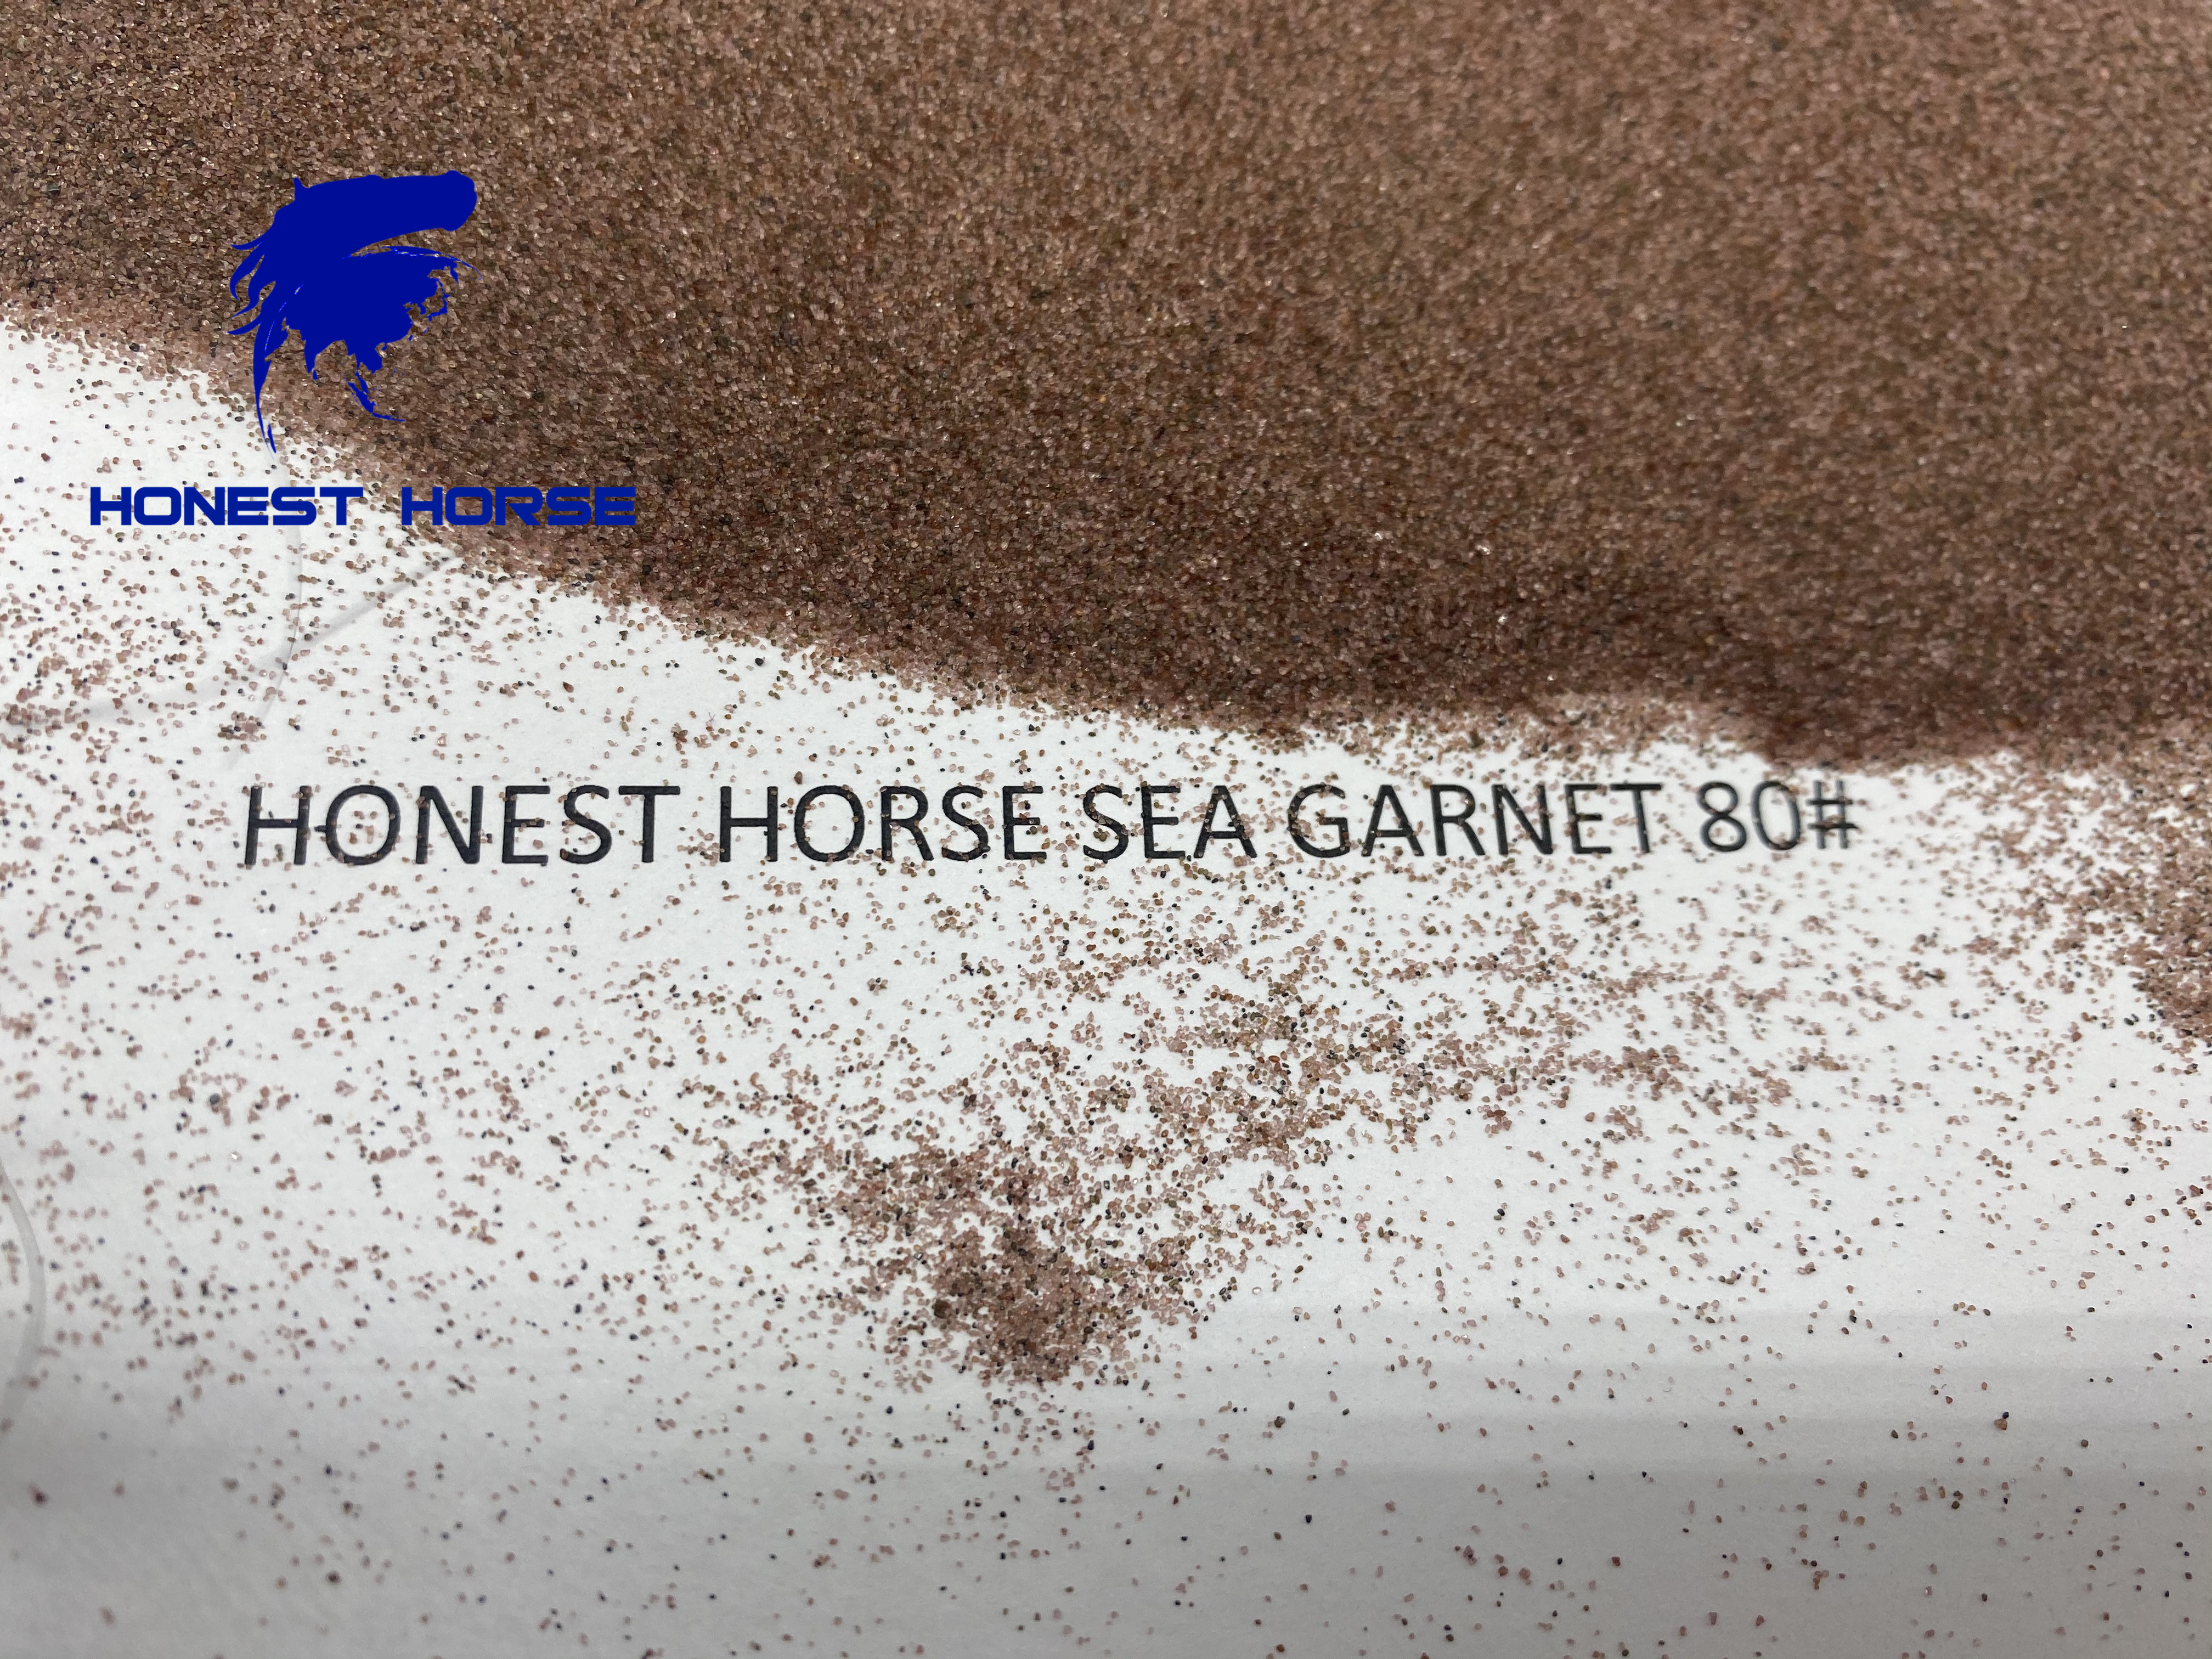 The cleanness of garnet sand affects cutting efficiency